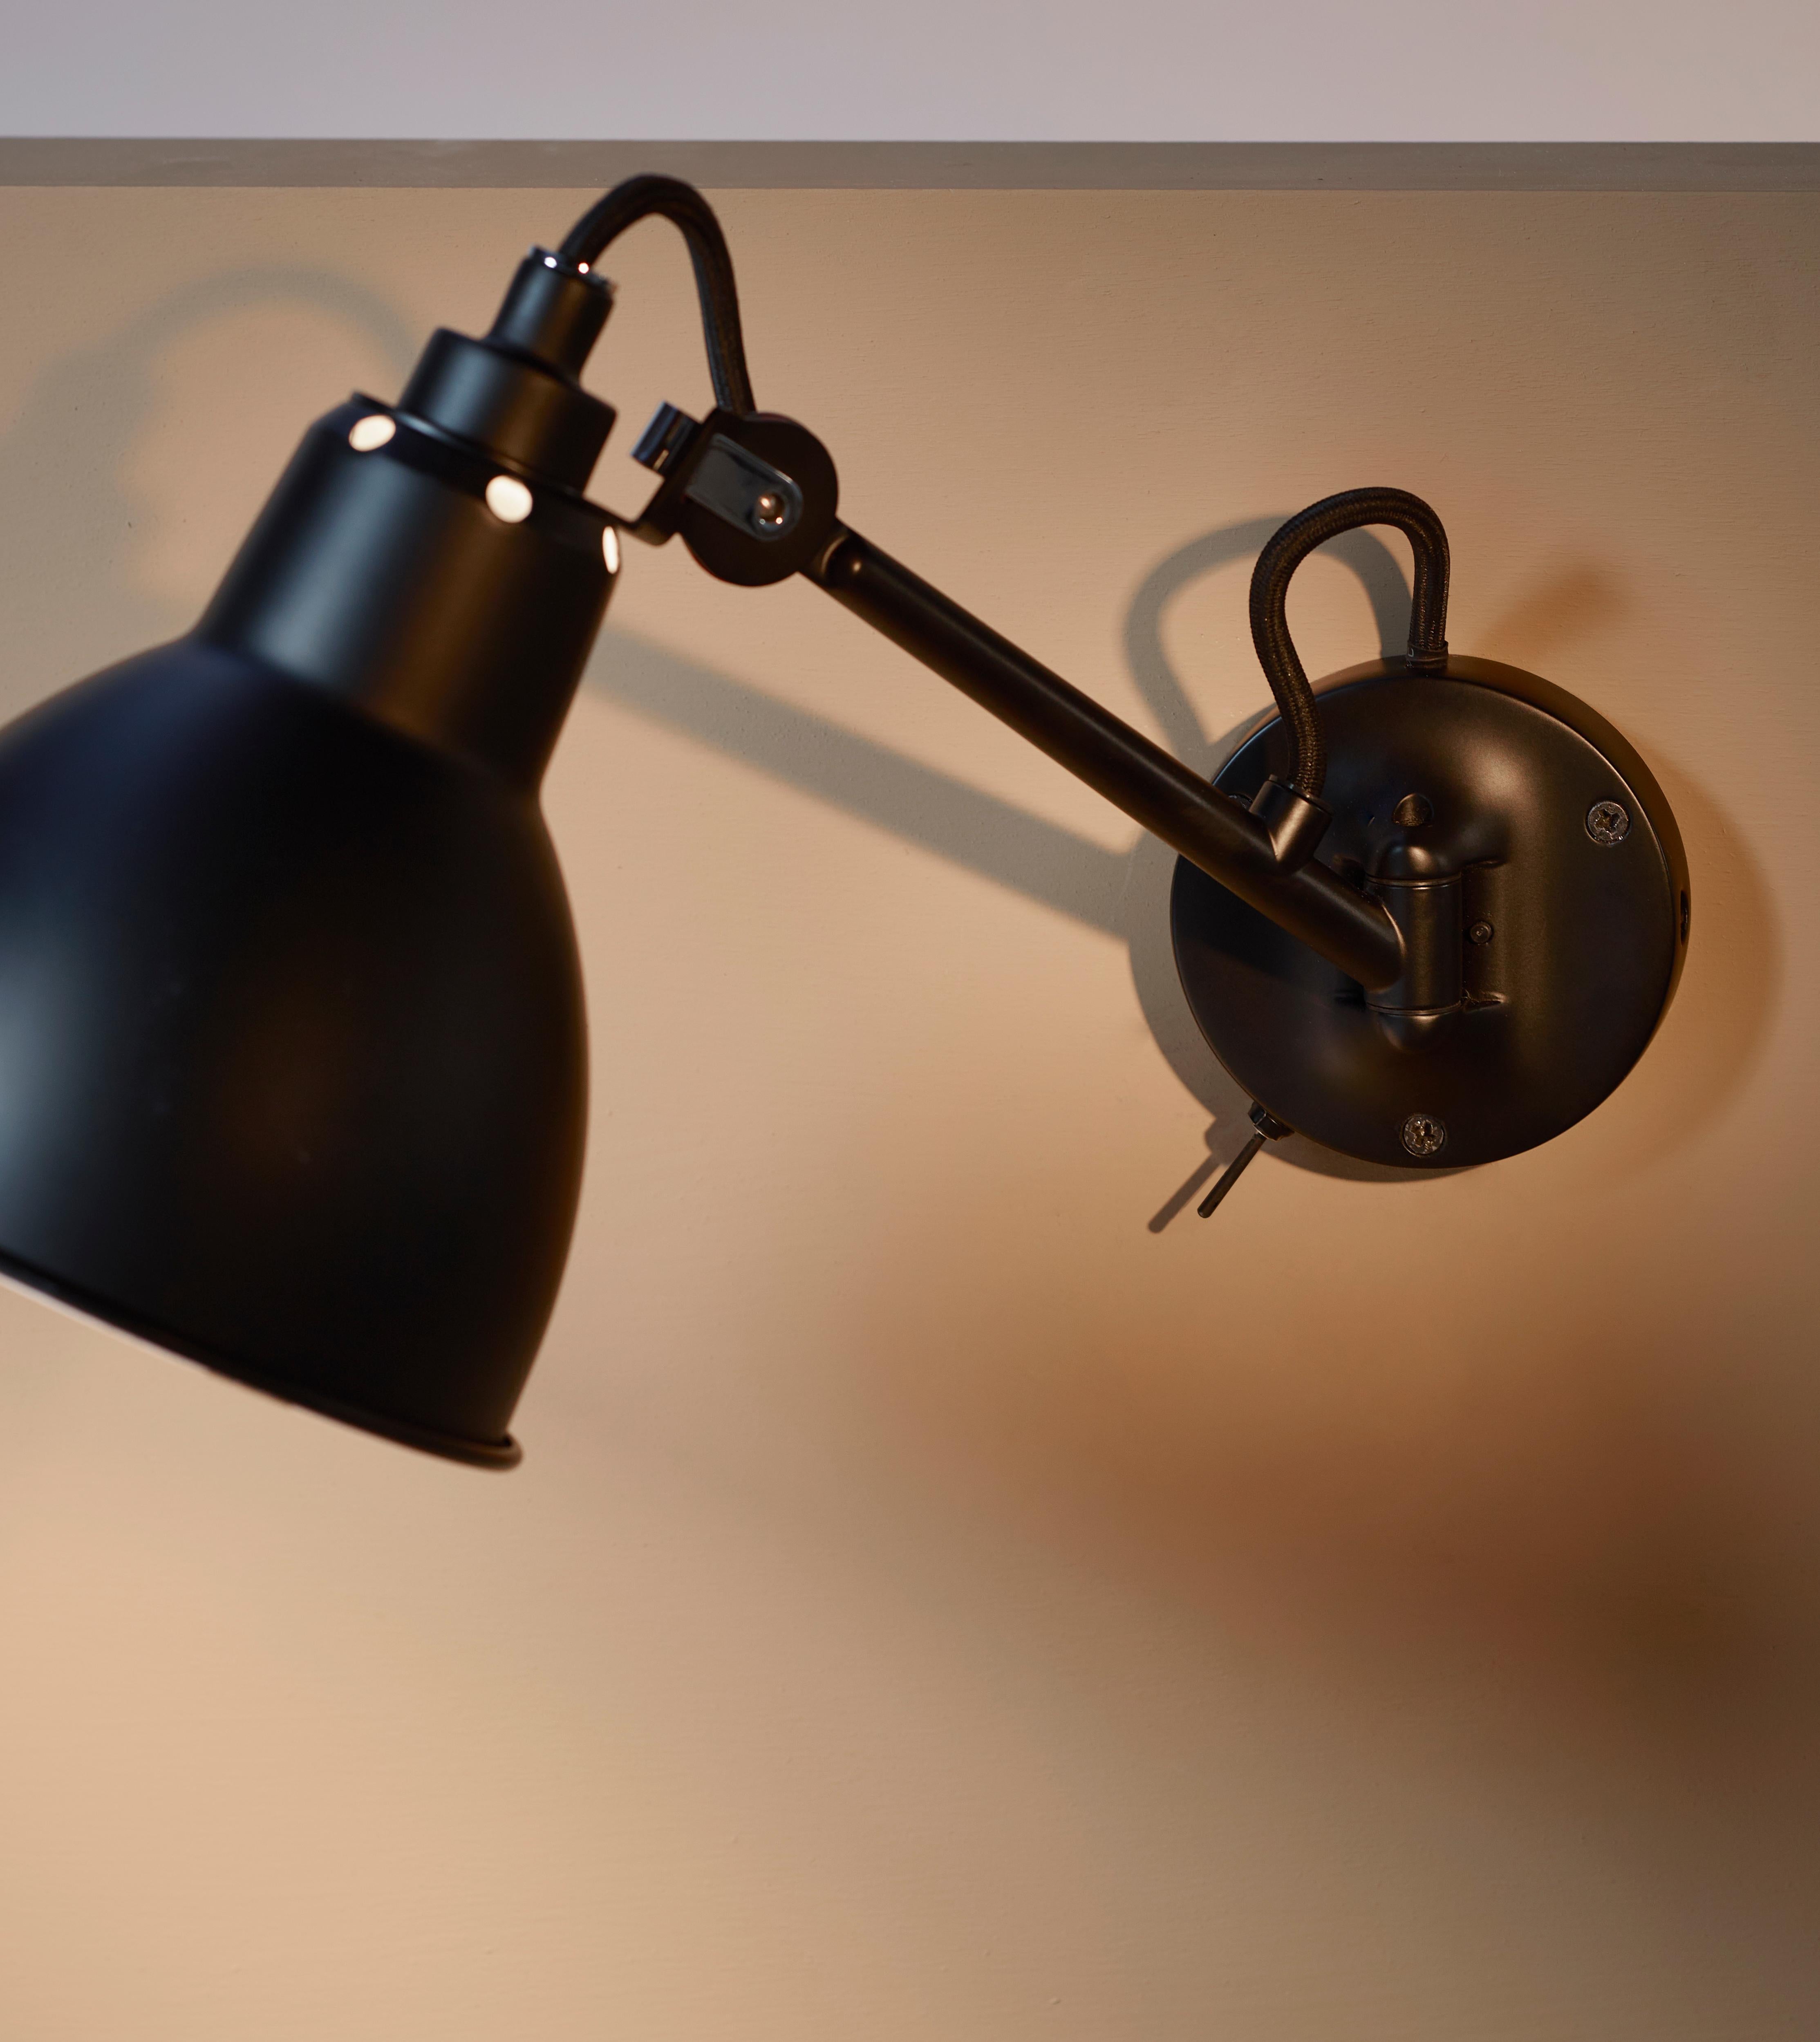 DCW Editions La Lampe Gras N°104 SW Wall Lamp in Black Steel Arm and Brass Shade by Bernard-Albin Gras
 
 In 1921 Bernard-Albin GRAS designed a series of lamps for use in offices and in industrial environments. The GRAS lamp, as it was subsequently